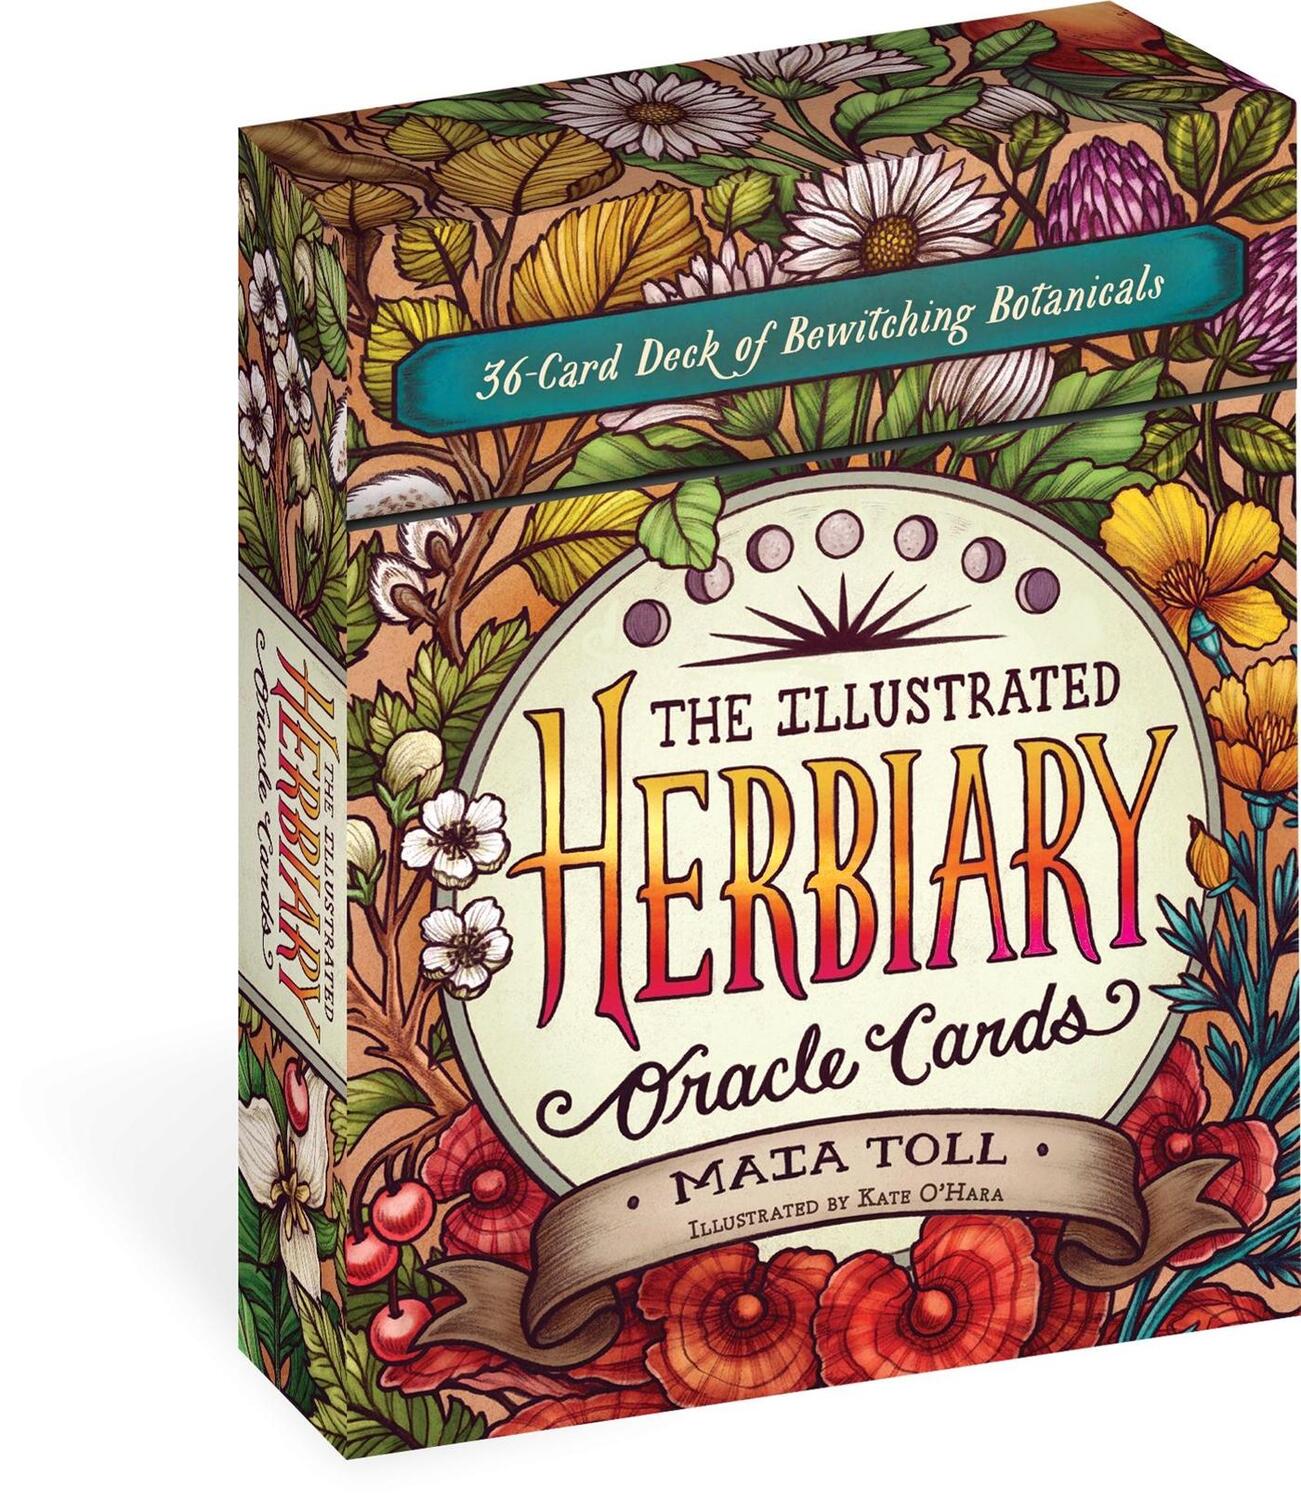 Cover: 9781635864854 | The Illustrated Herbiary Oracle Cards | Mata Toll | Wild Wisdom | 2021